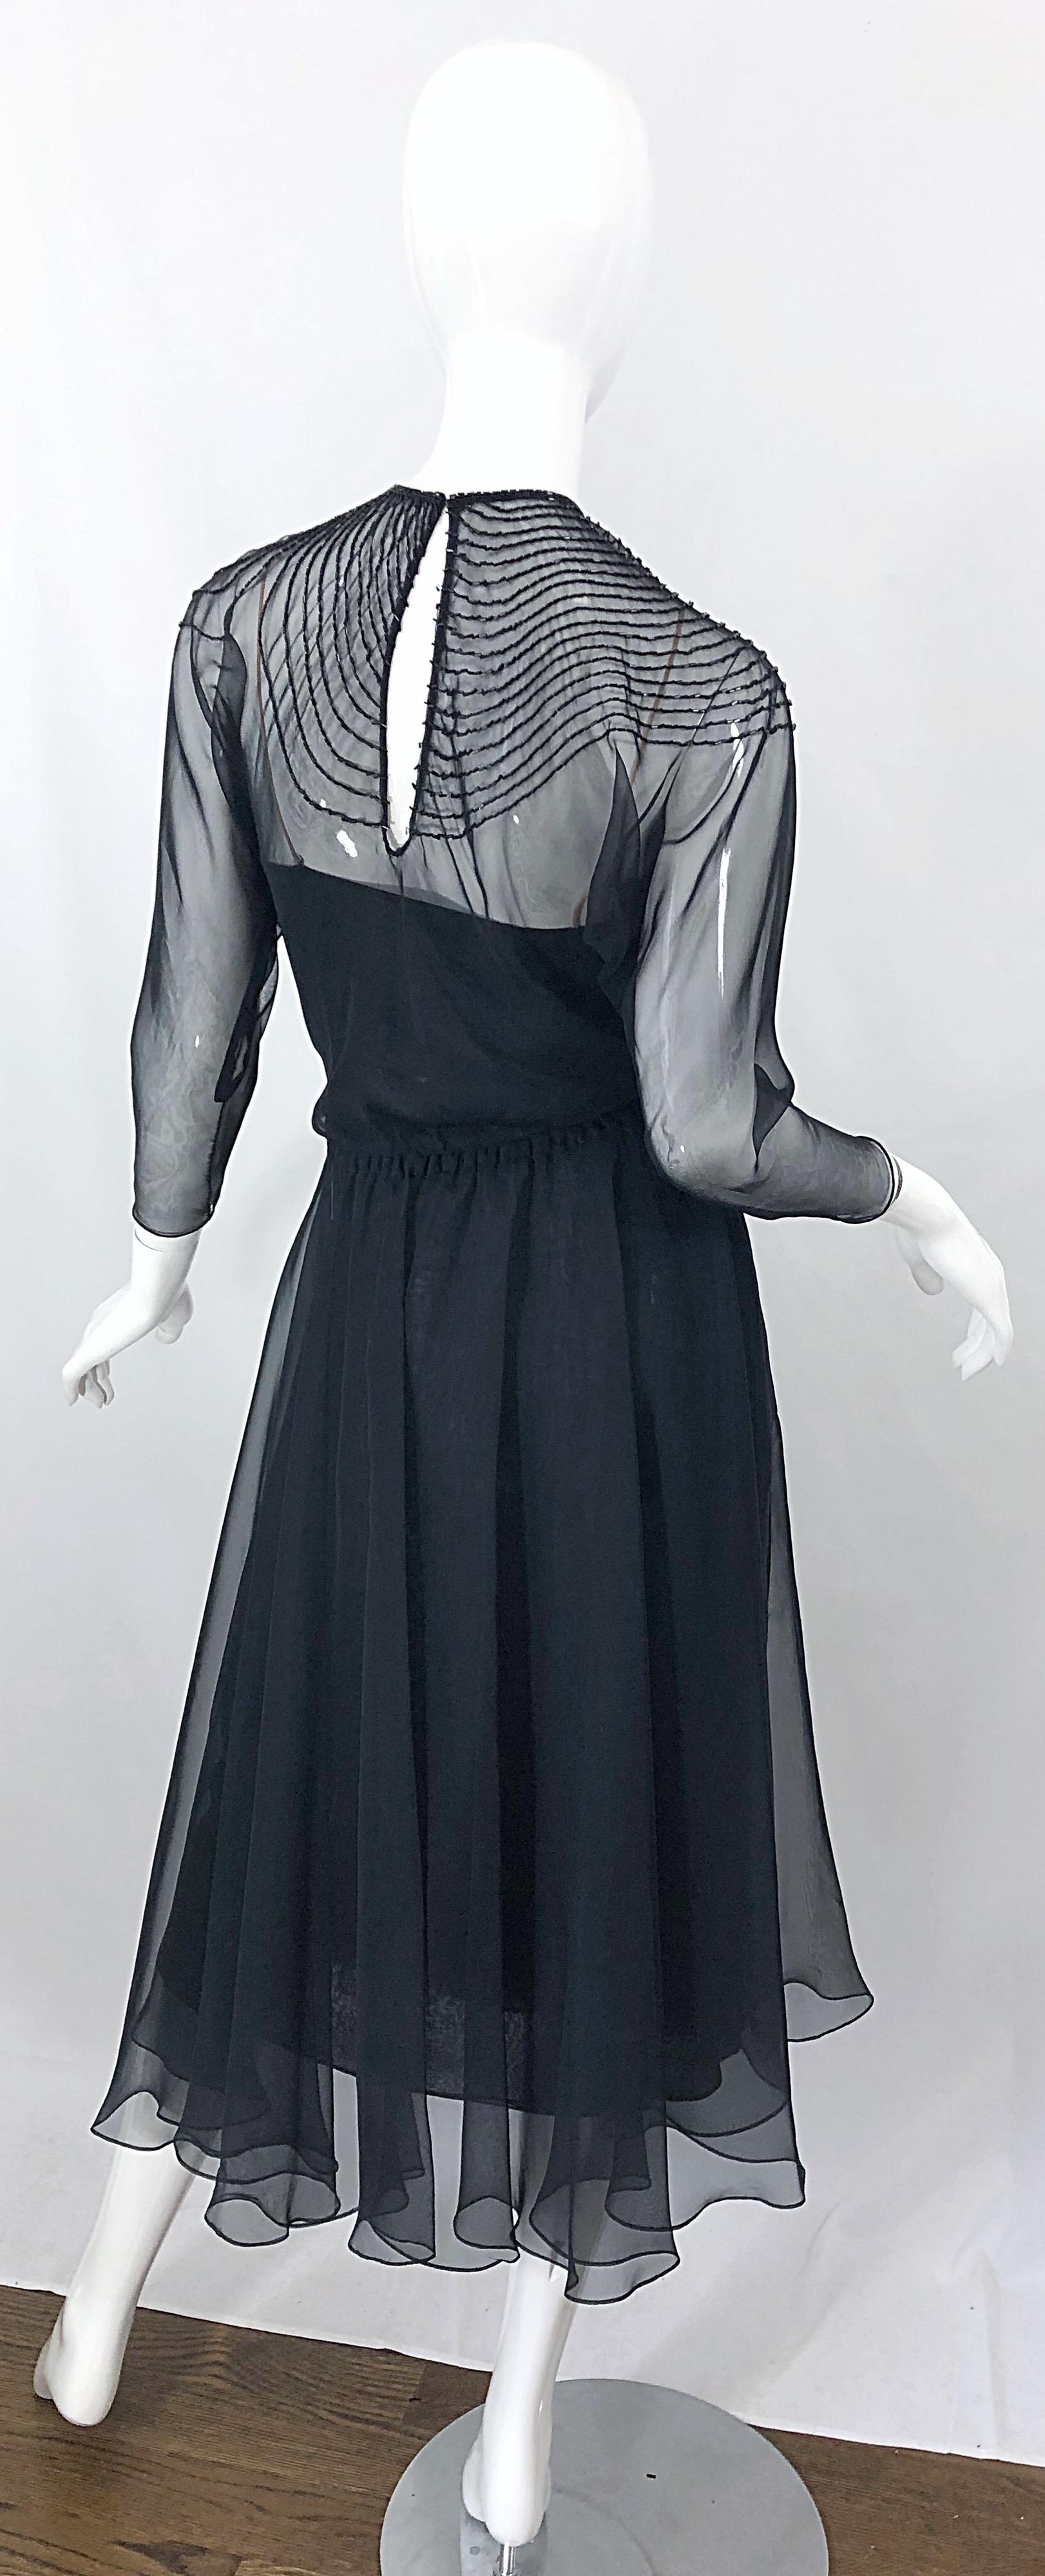 Exceptional vintage 70s HALSTON Couture black silk chiffon beaded dress and sash belt or head scarf! Features a separate black silk chiffon slip with three layers of chiffon and nude straps. The slip could actually be worn as a dress by itself.